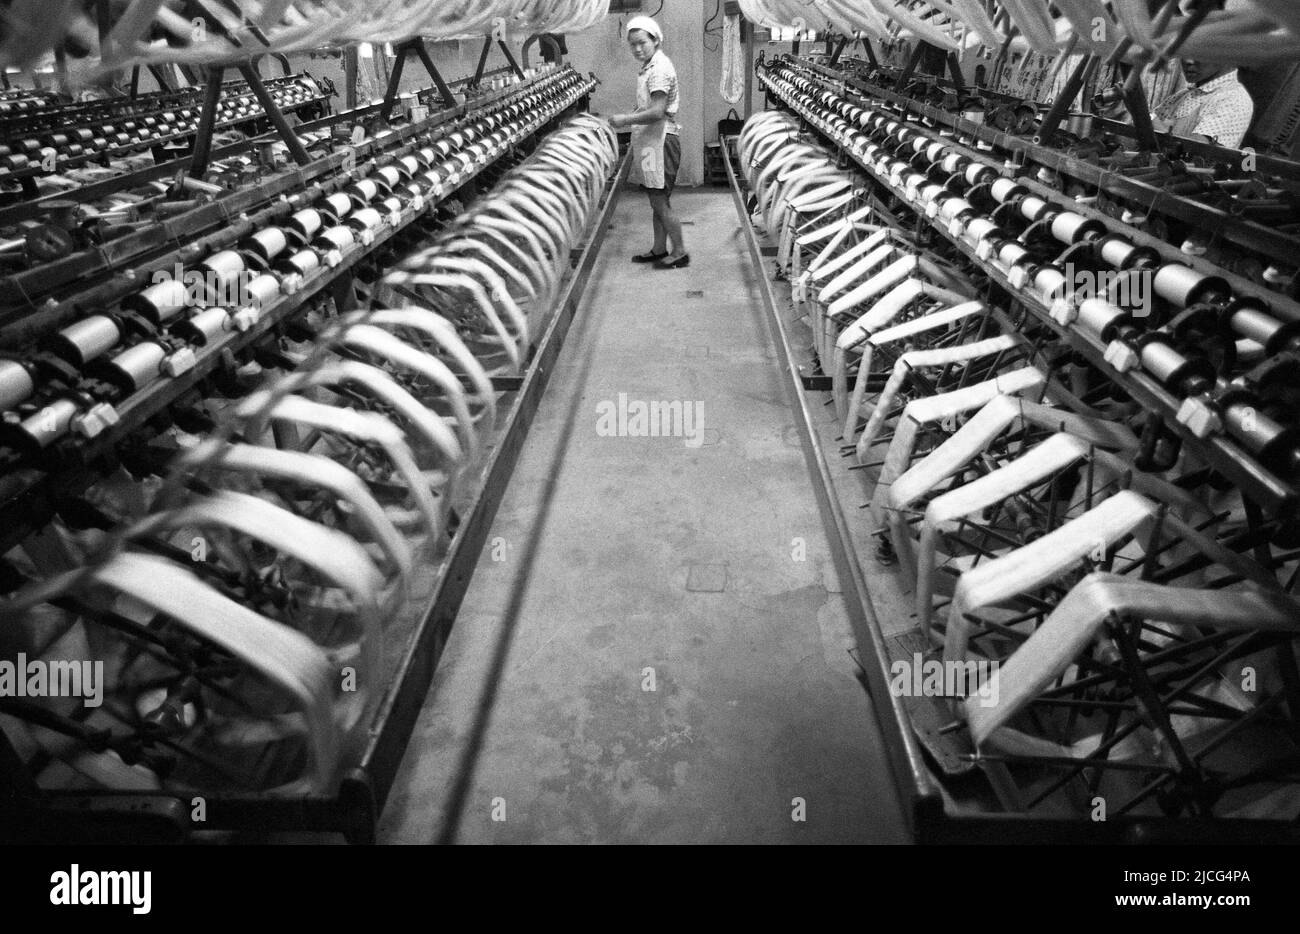 Chinese woman, worker in a textile factory, in the foreground spinning machines, loom, black and white, black and white, black and white, monochrome, SW Monochrome, black and white photo, July 29, 1972 Stock Photo